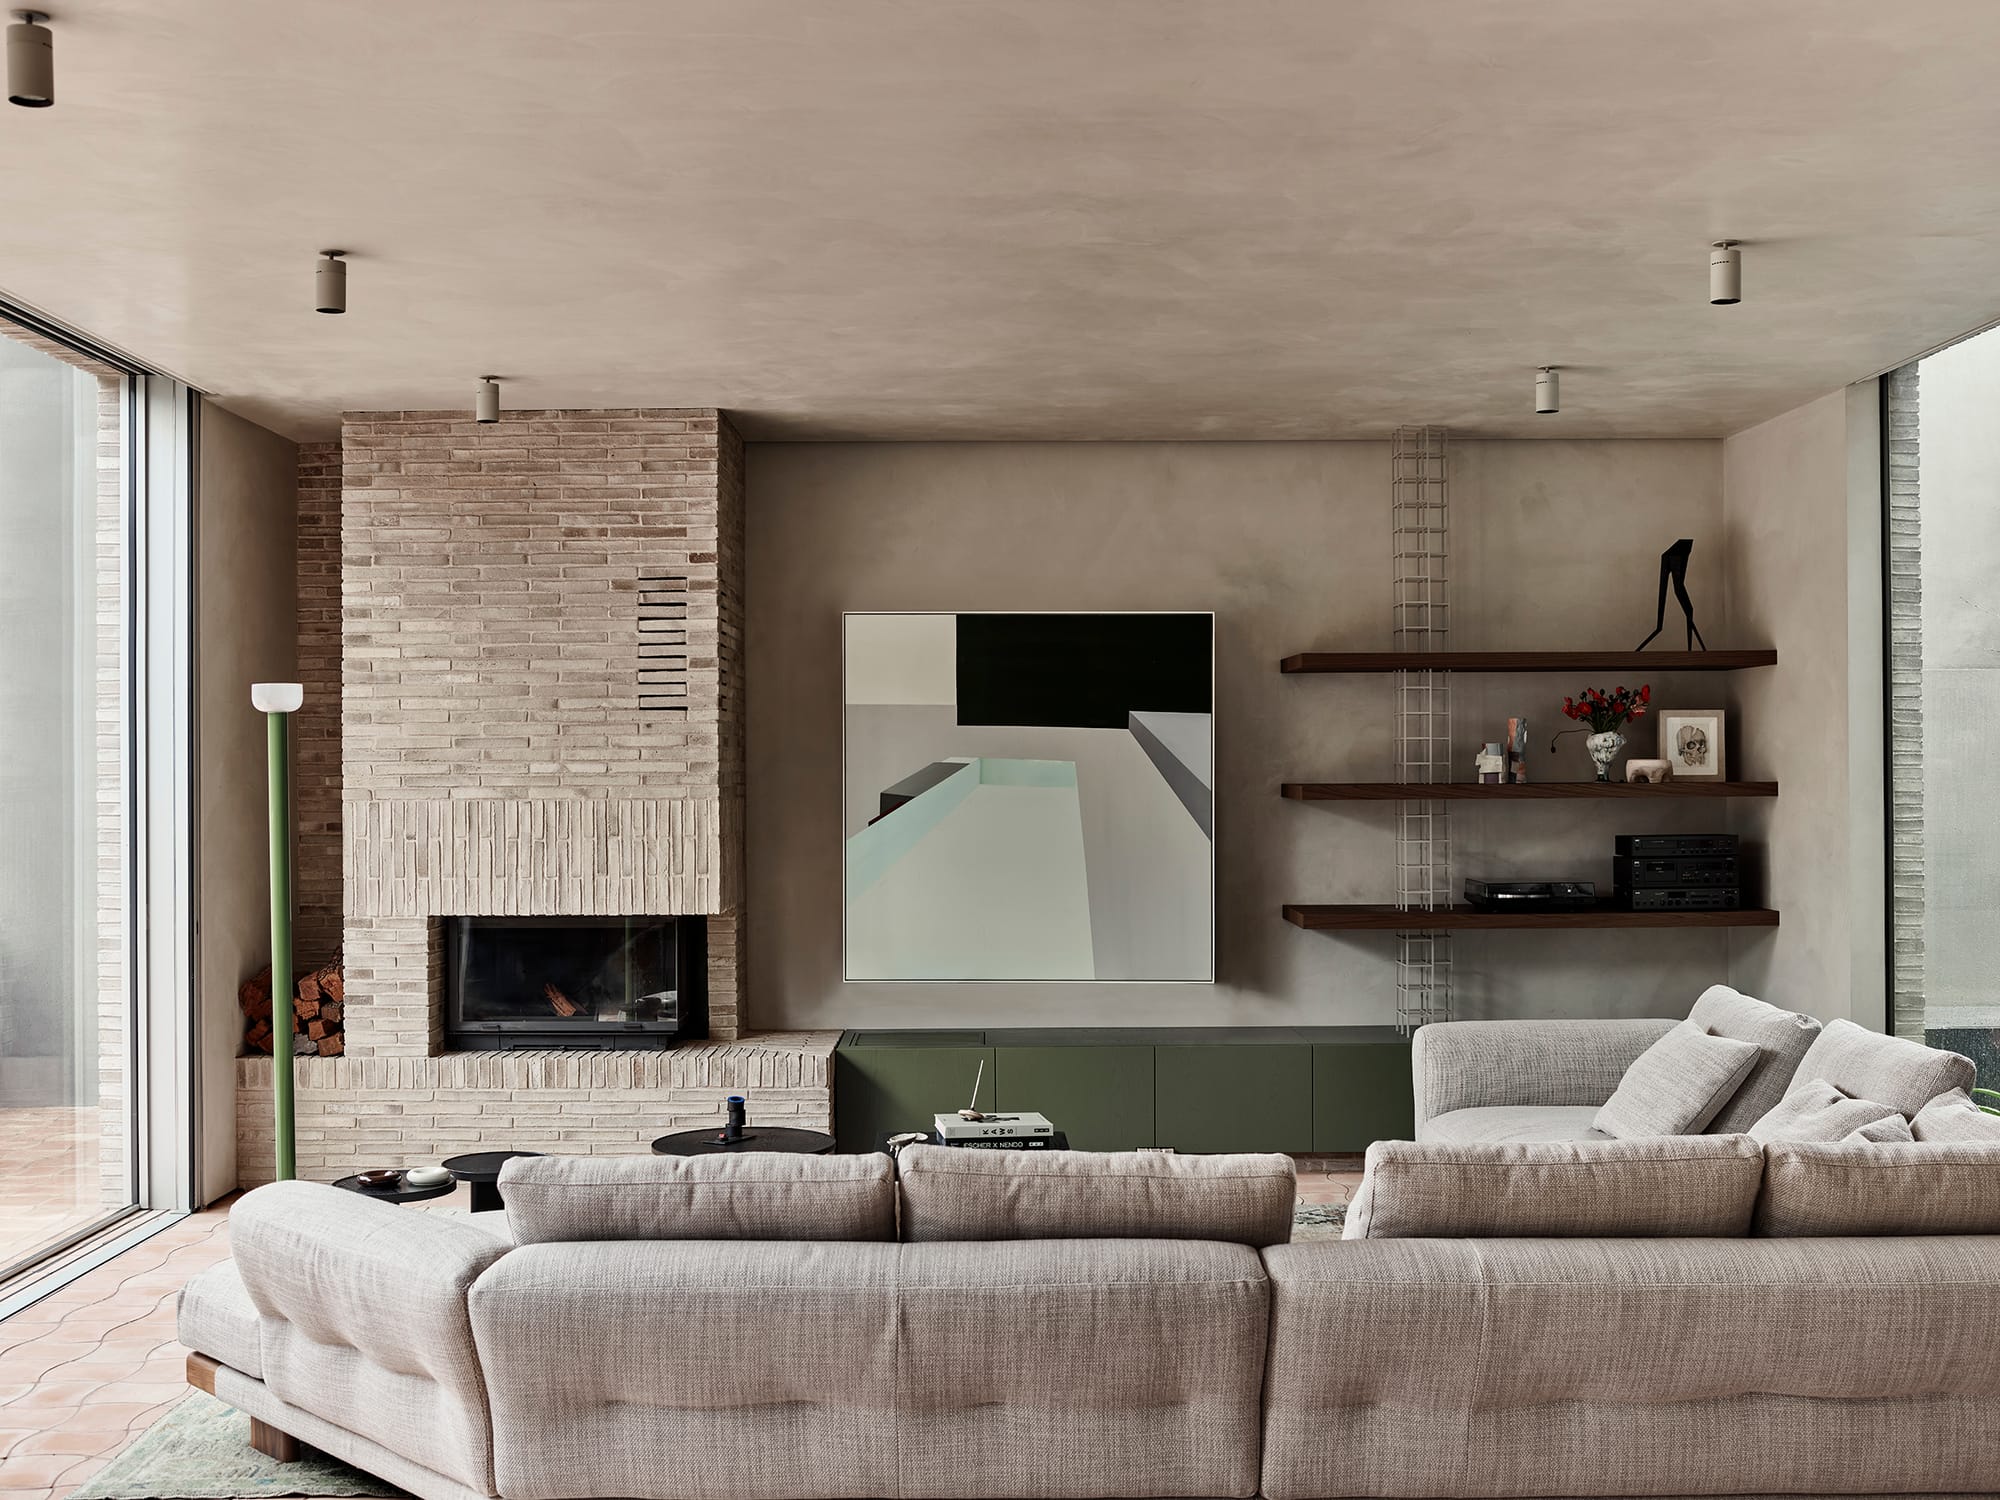 Terra Firma by RobsonRak showing an interior view of the living room with brick fireplace